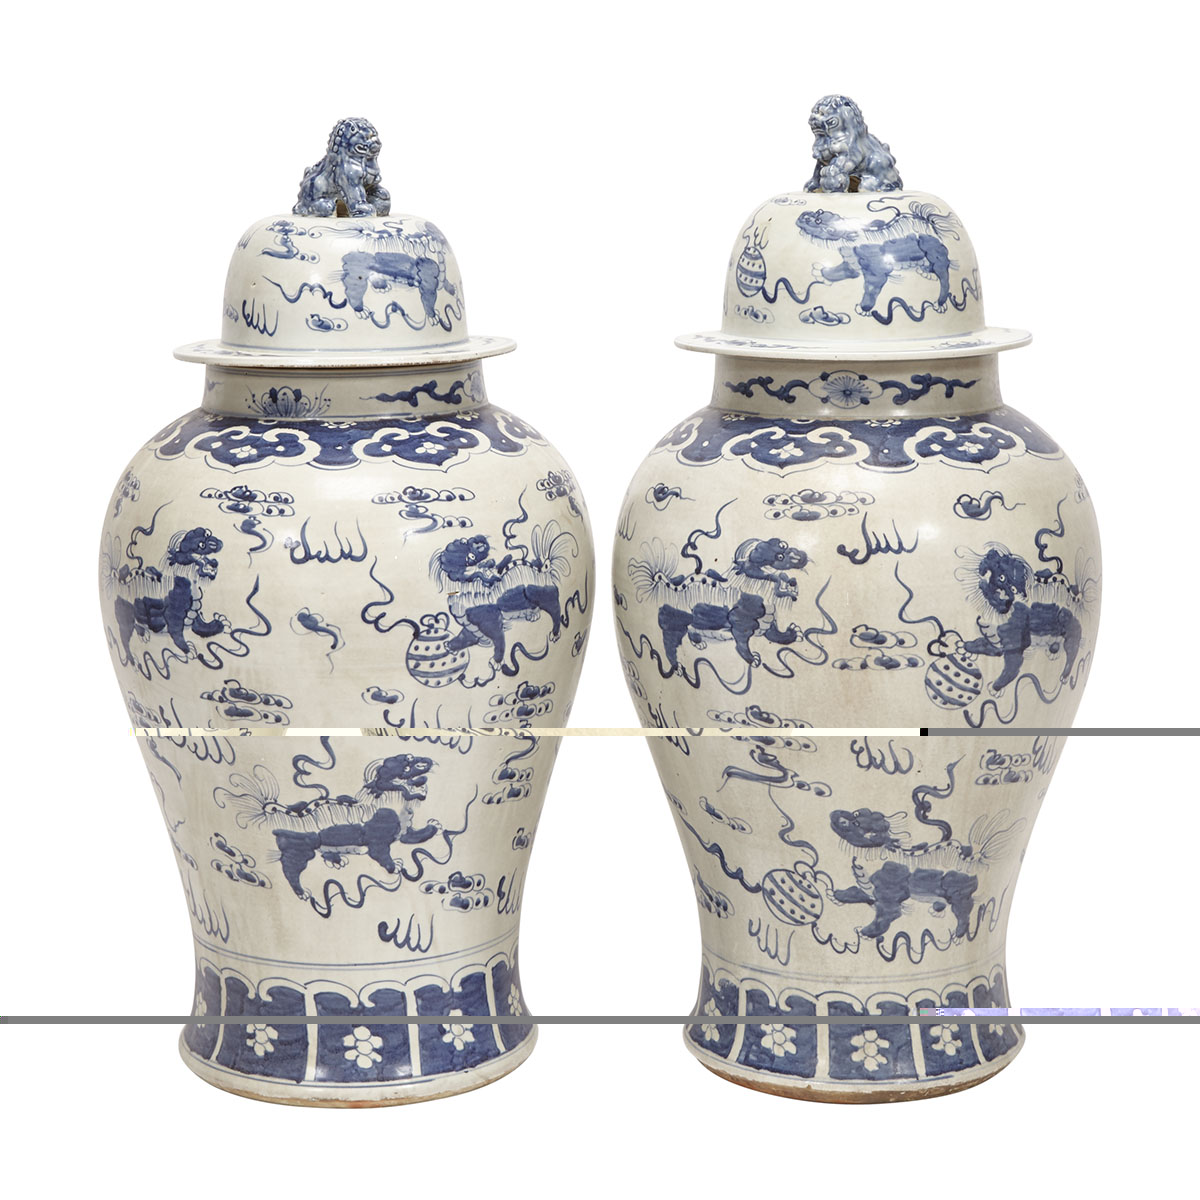 A Pair of Blue and White Lidded Jars, Late Qing Dynasty